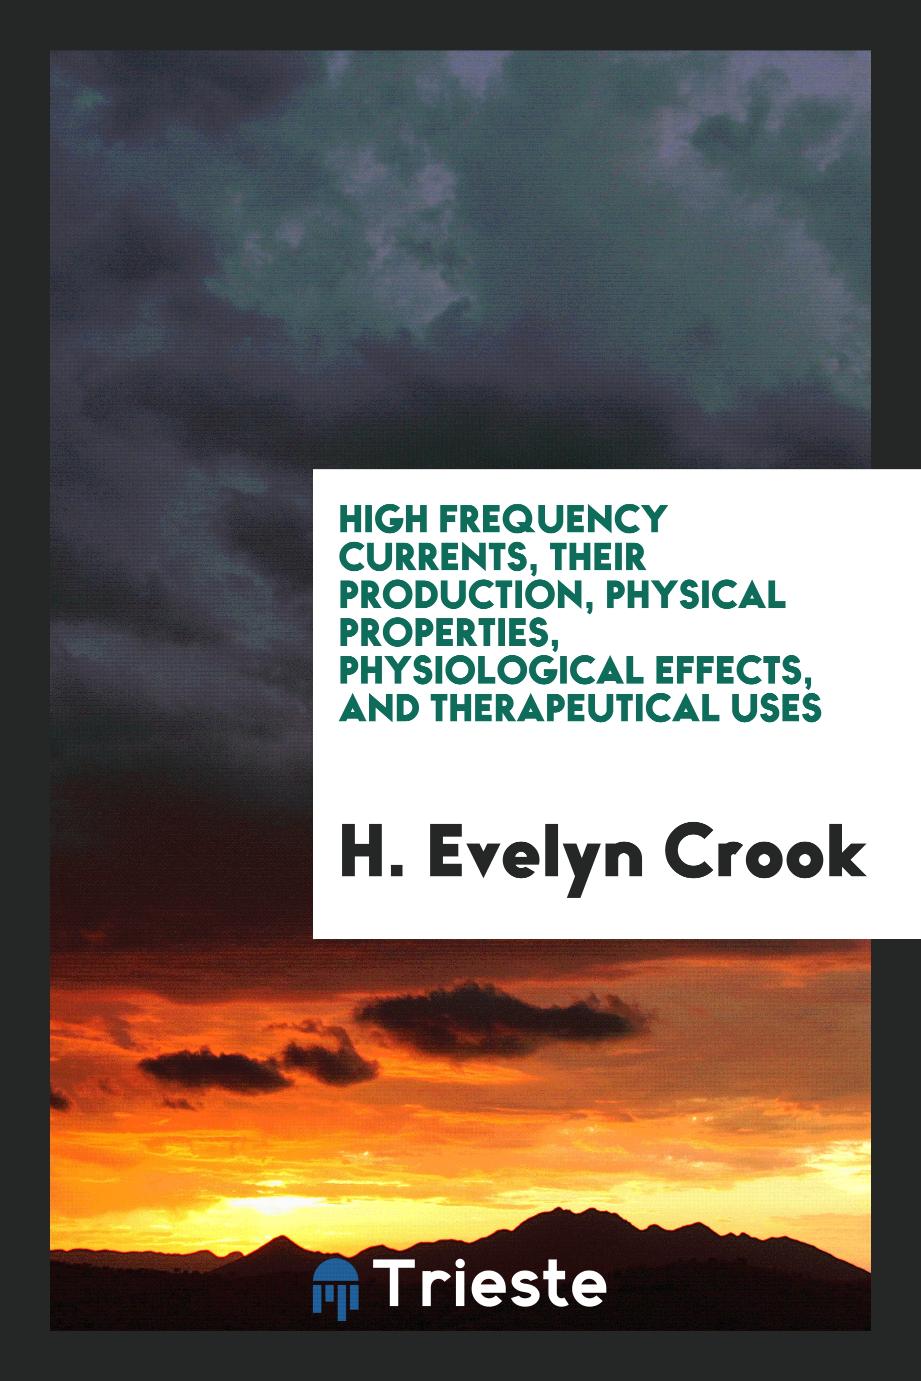 High frequency currents, their production, physical properties, physiological effects, and therapeutical uses